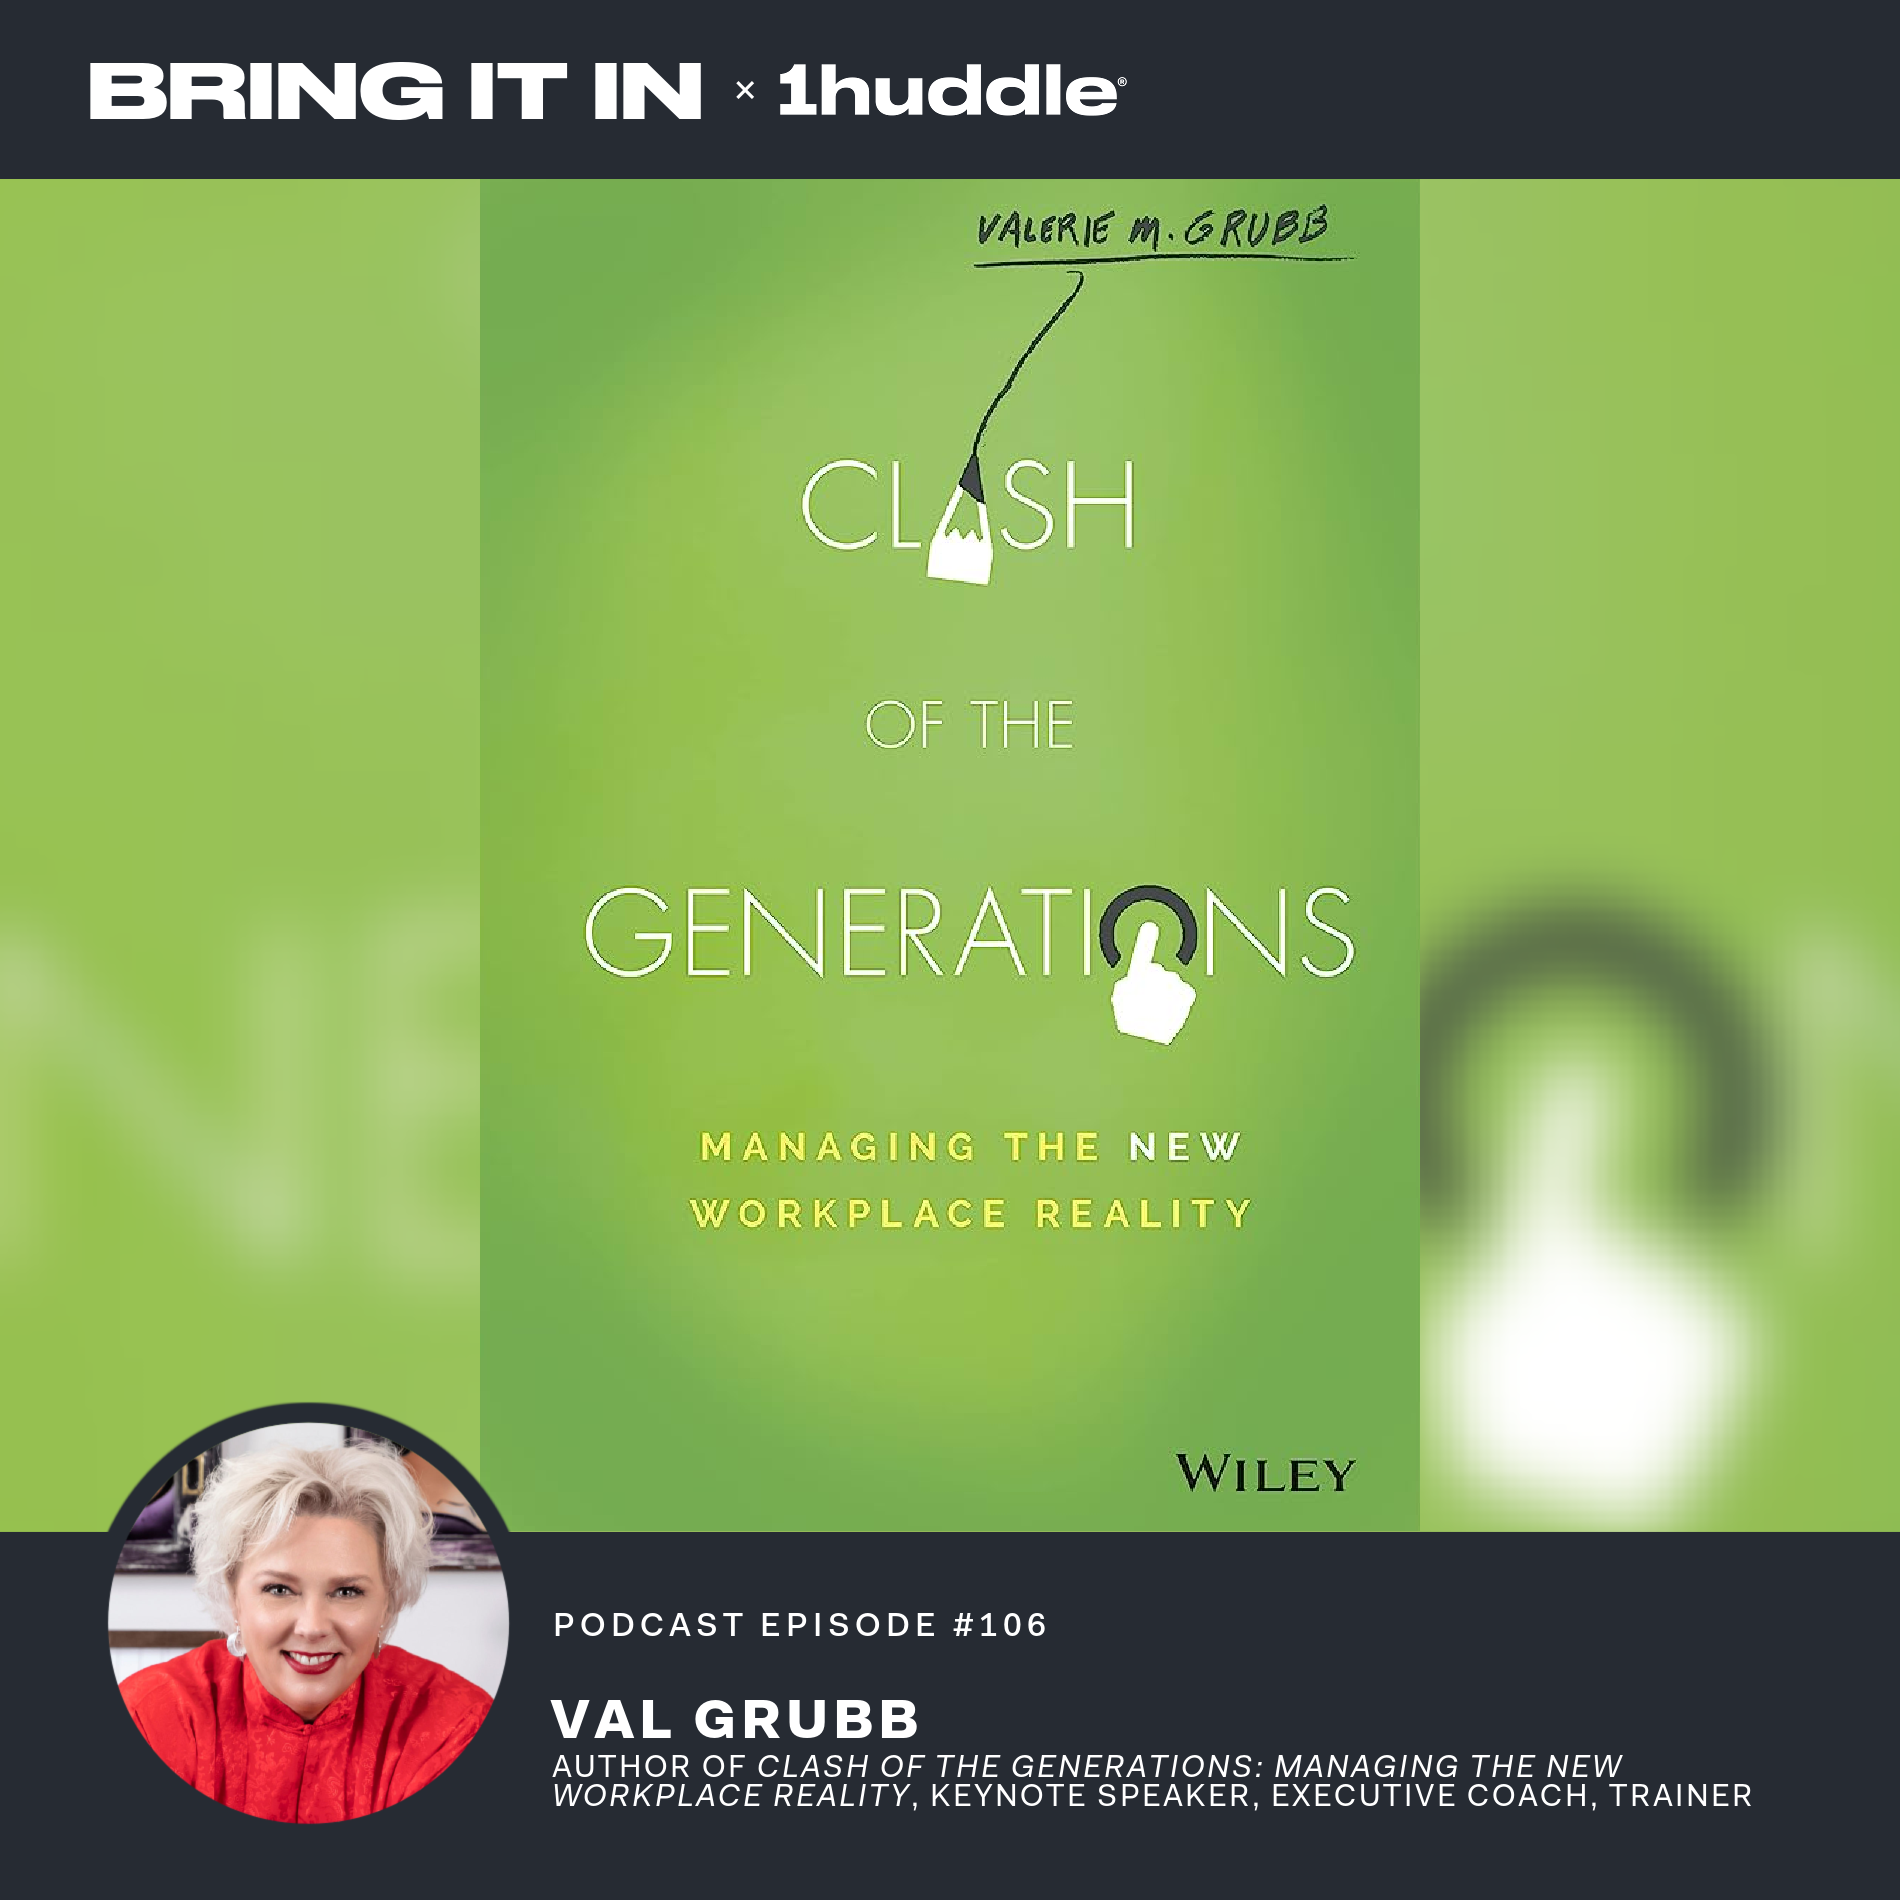 Author of “Clash of the Generations: Managing the New Workplace Reality”